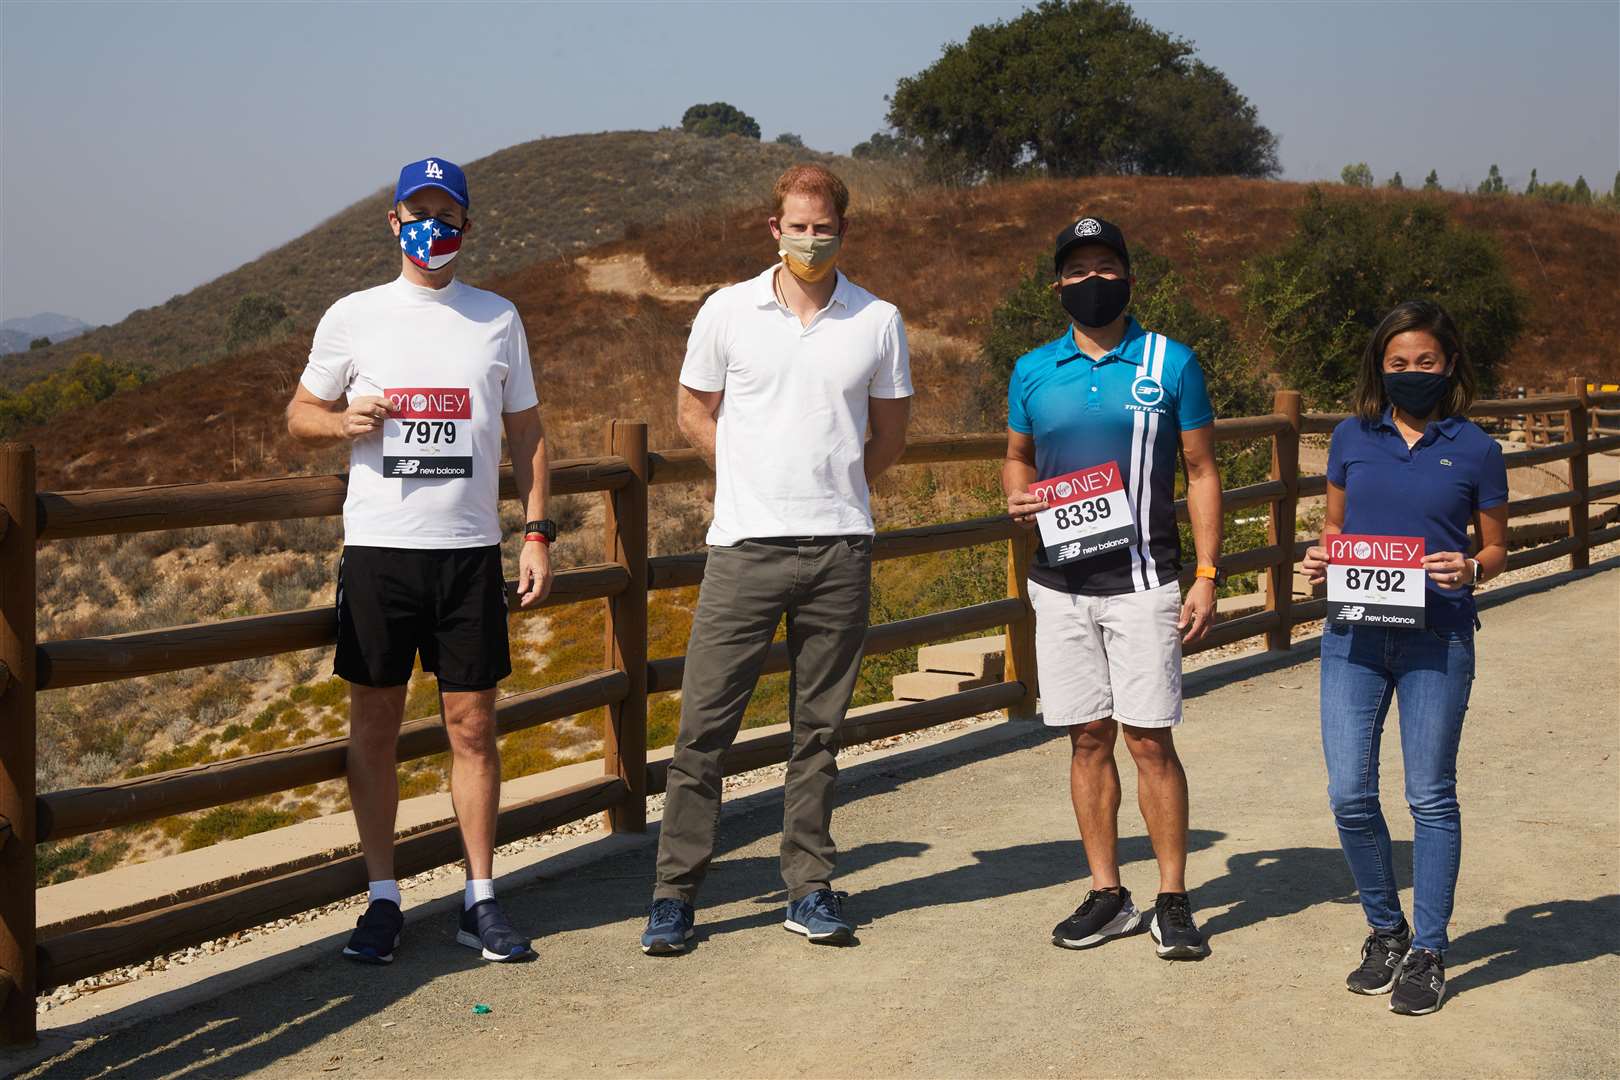 The Duke of Sussex, patron of the London Marathon Charitable Trust, poses with runners in Los Angeles before they take on the virtual Virgin Money London Marathon (Bob Martin/London Marathon Events/PA)